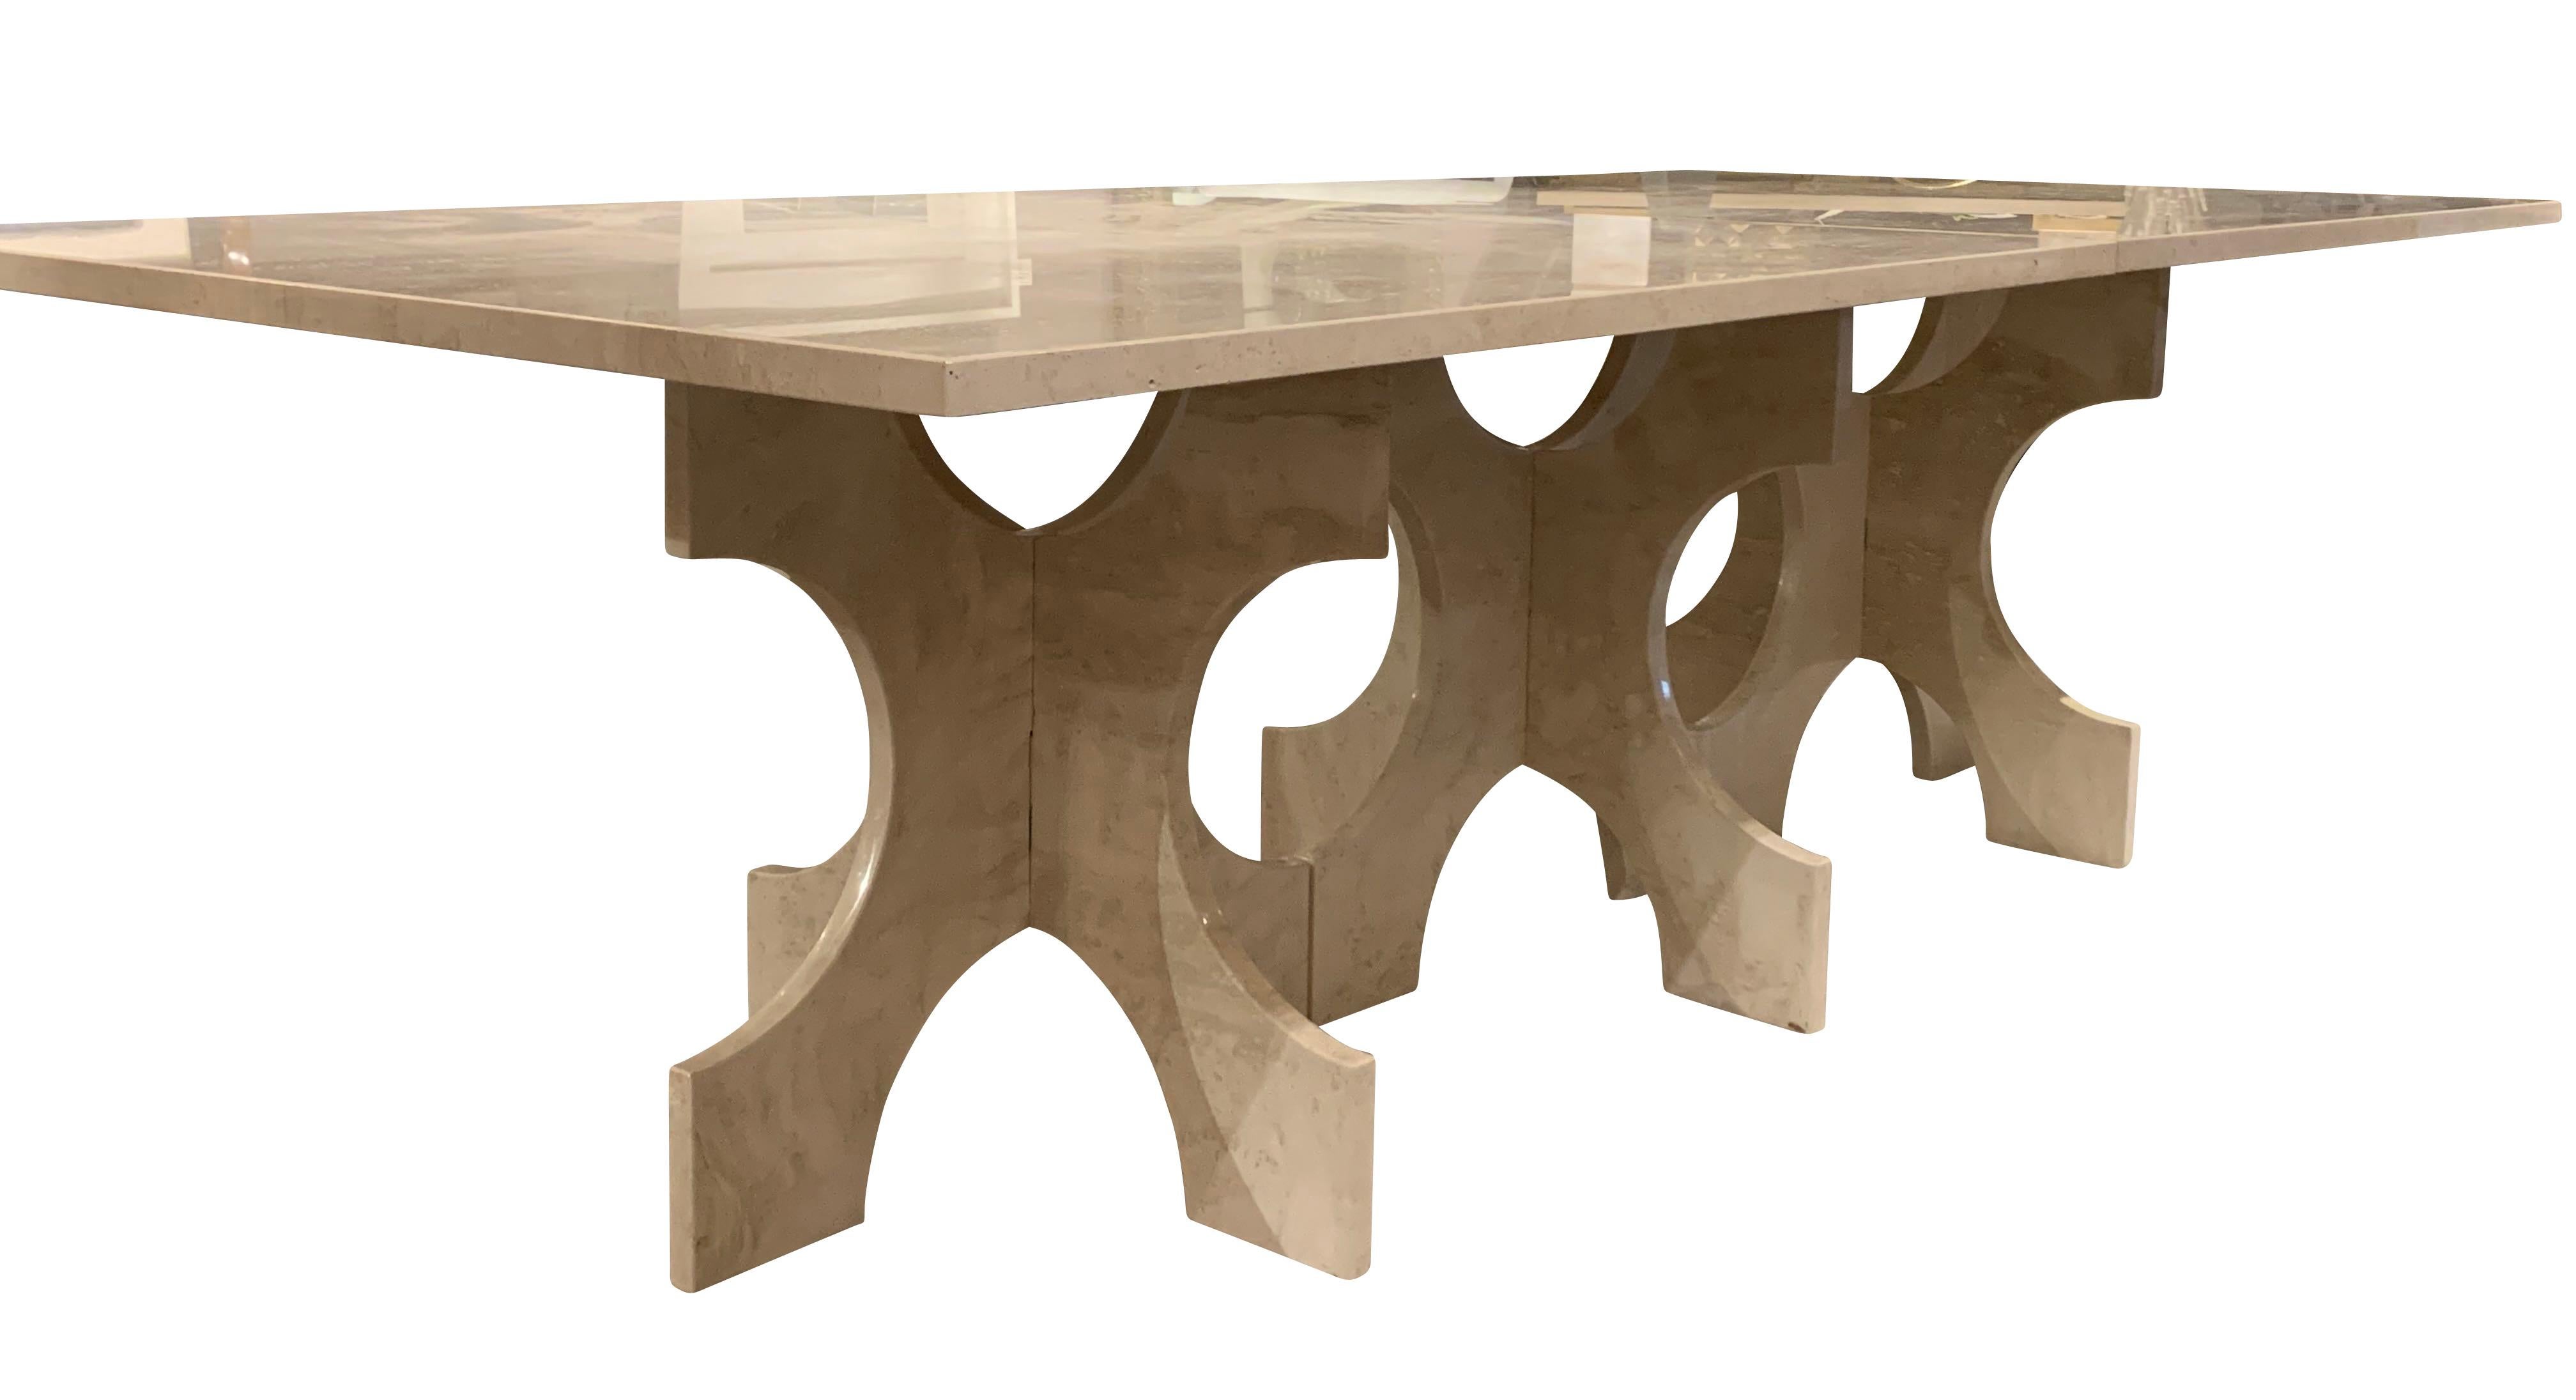 Bespoke Italian travertine dining table.
The table pictured is Italian travertine with a polished and filled finish.
This table is extra long - 108